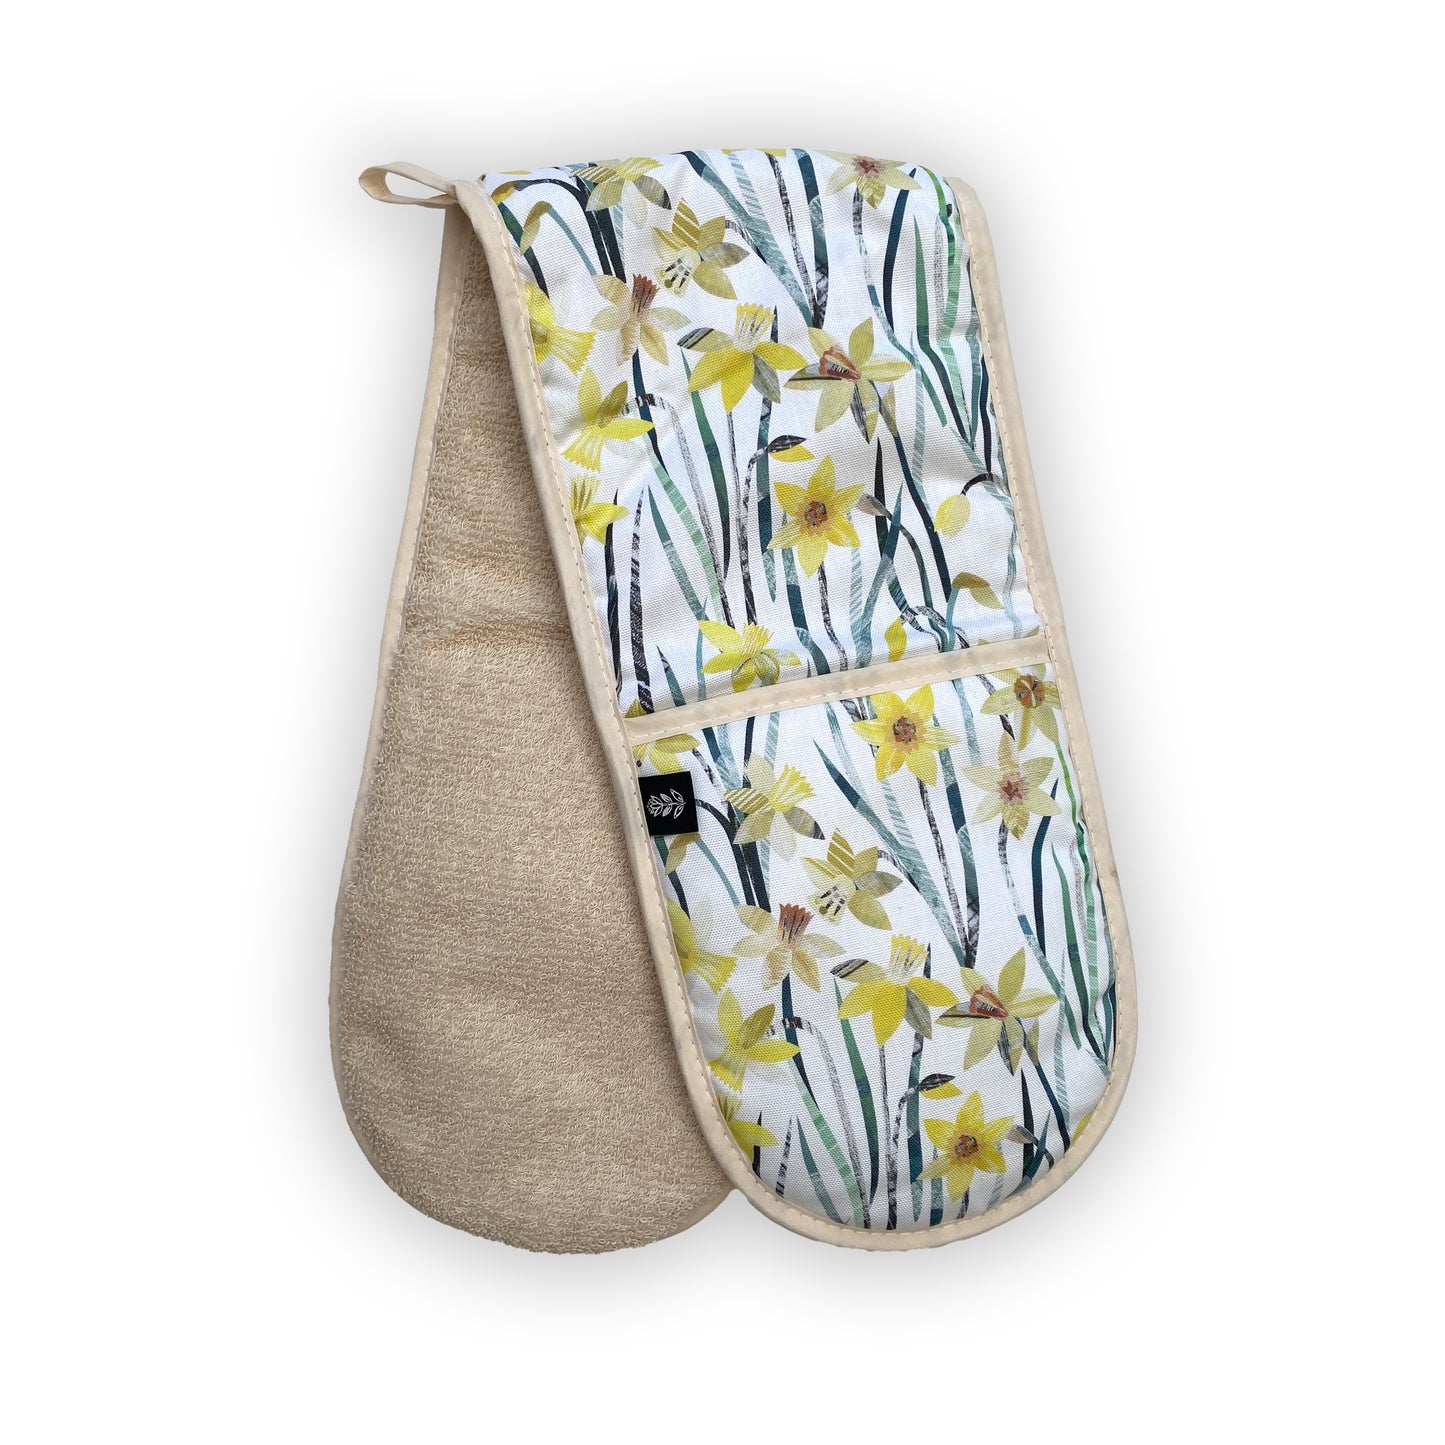 Daffodil Oven Gloves featuring a yellow and green textured daffodil pattern on a white background.  The have been placed at an angle so that the Ecru towelling backing can be seen.